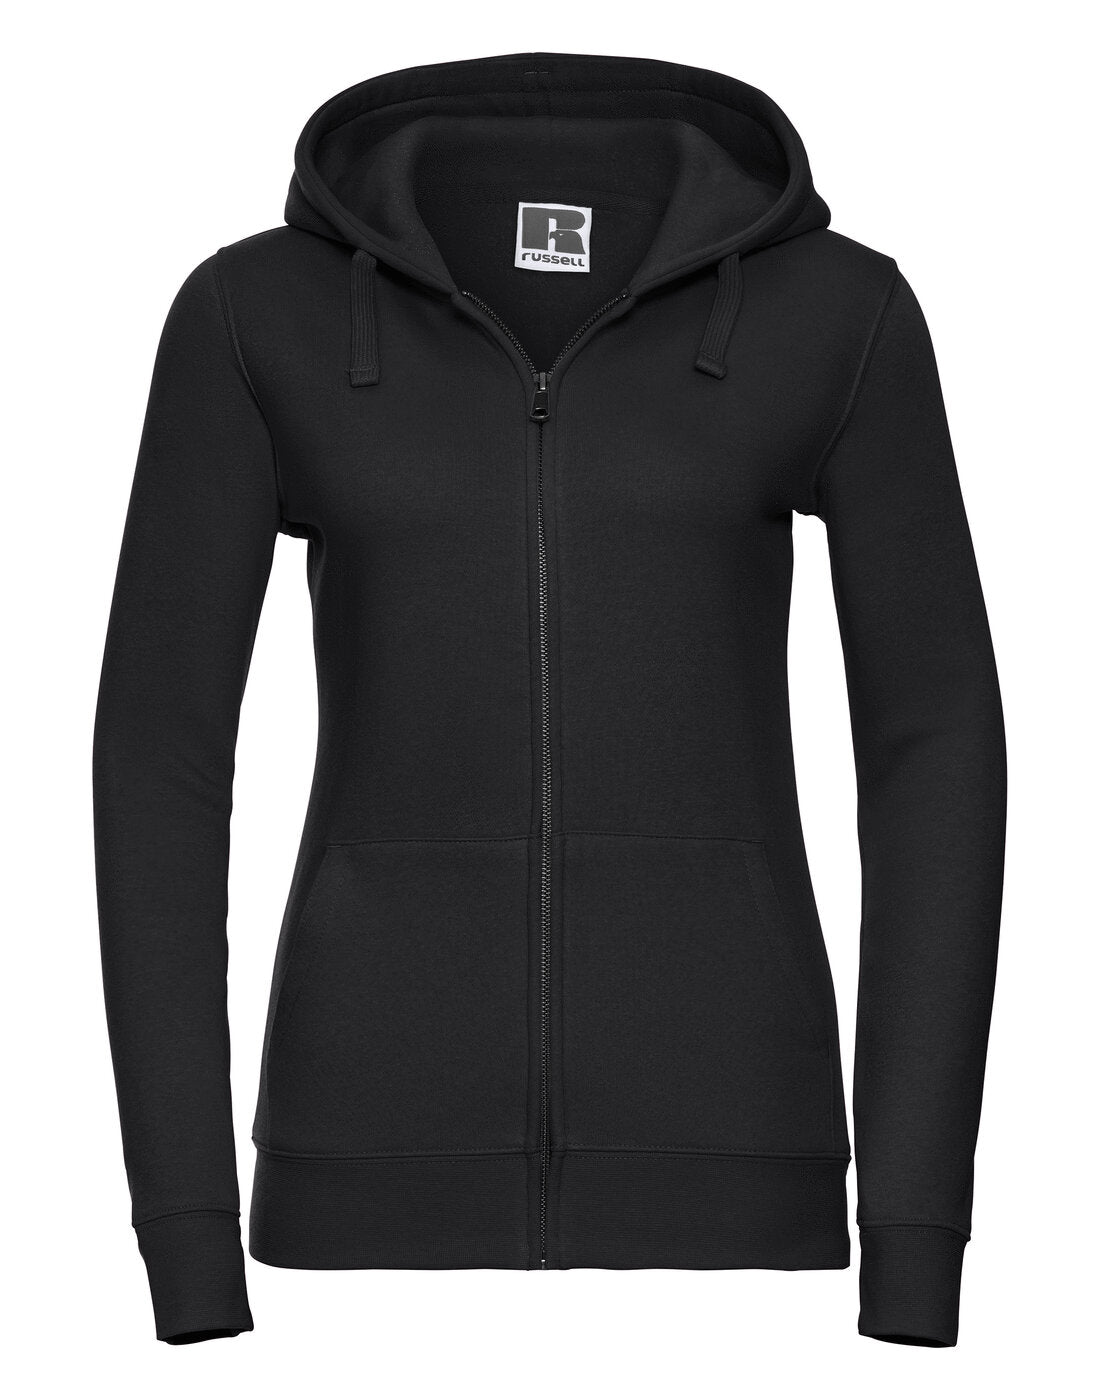 Russell Ladies Authentic Zipped Hood Black